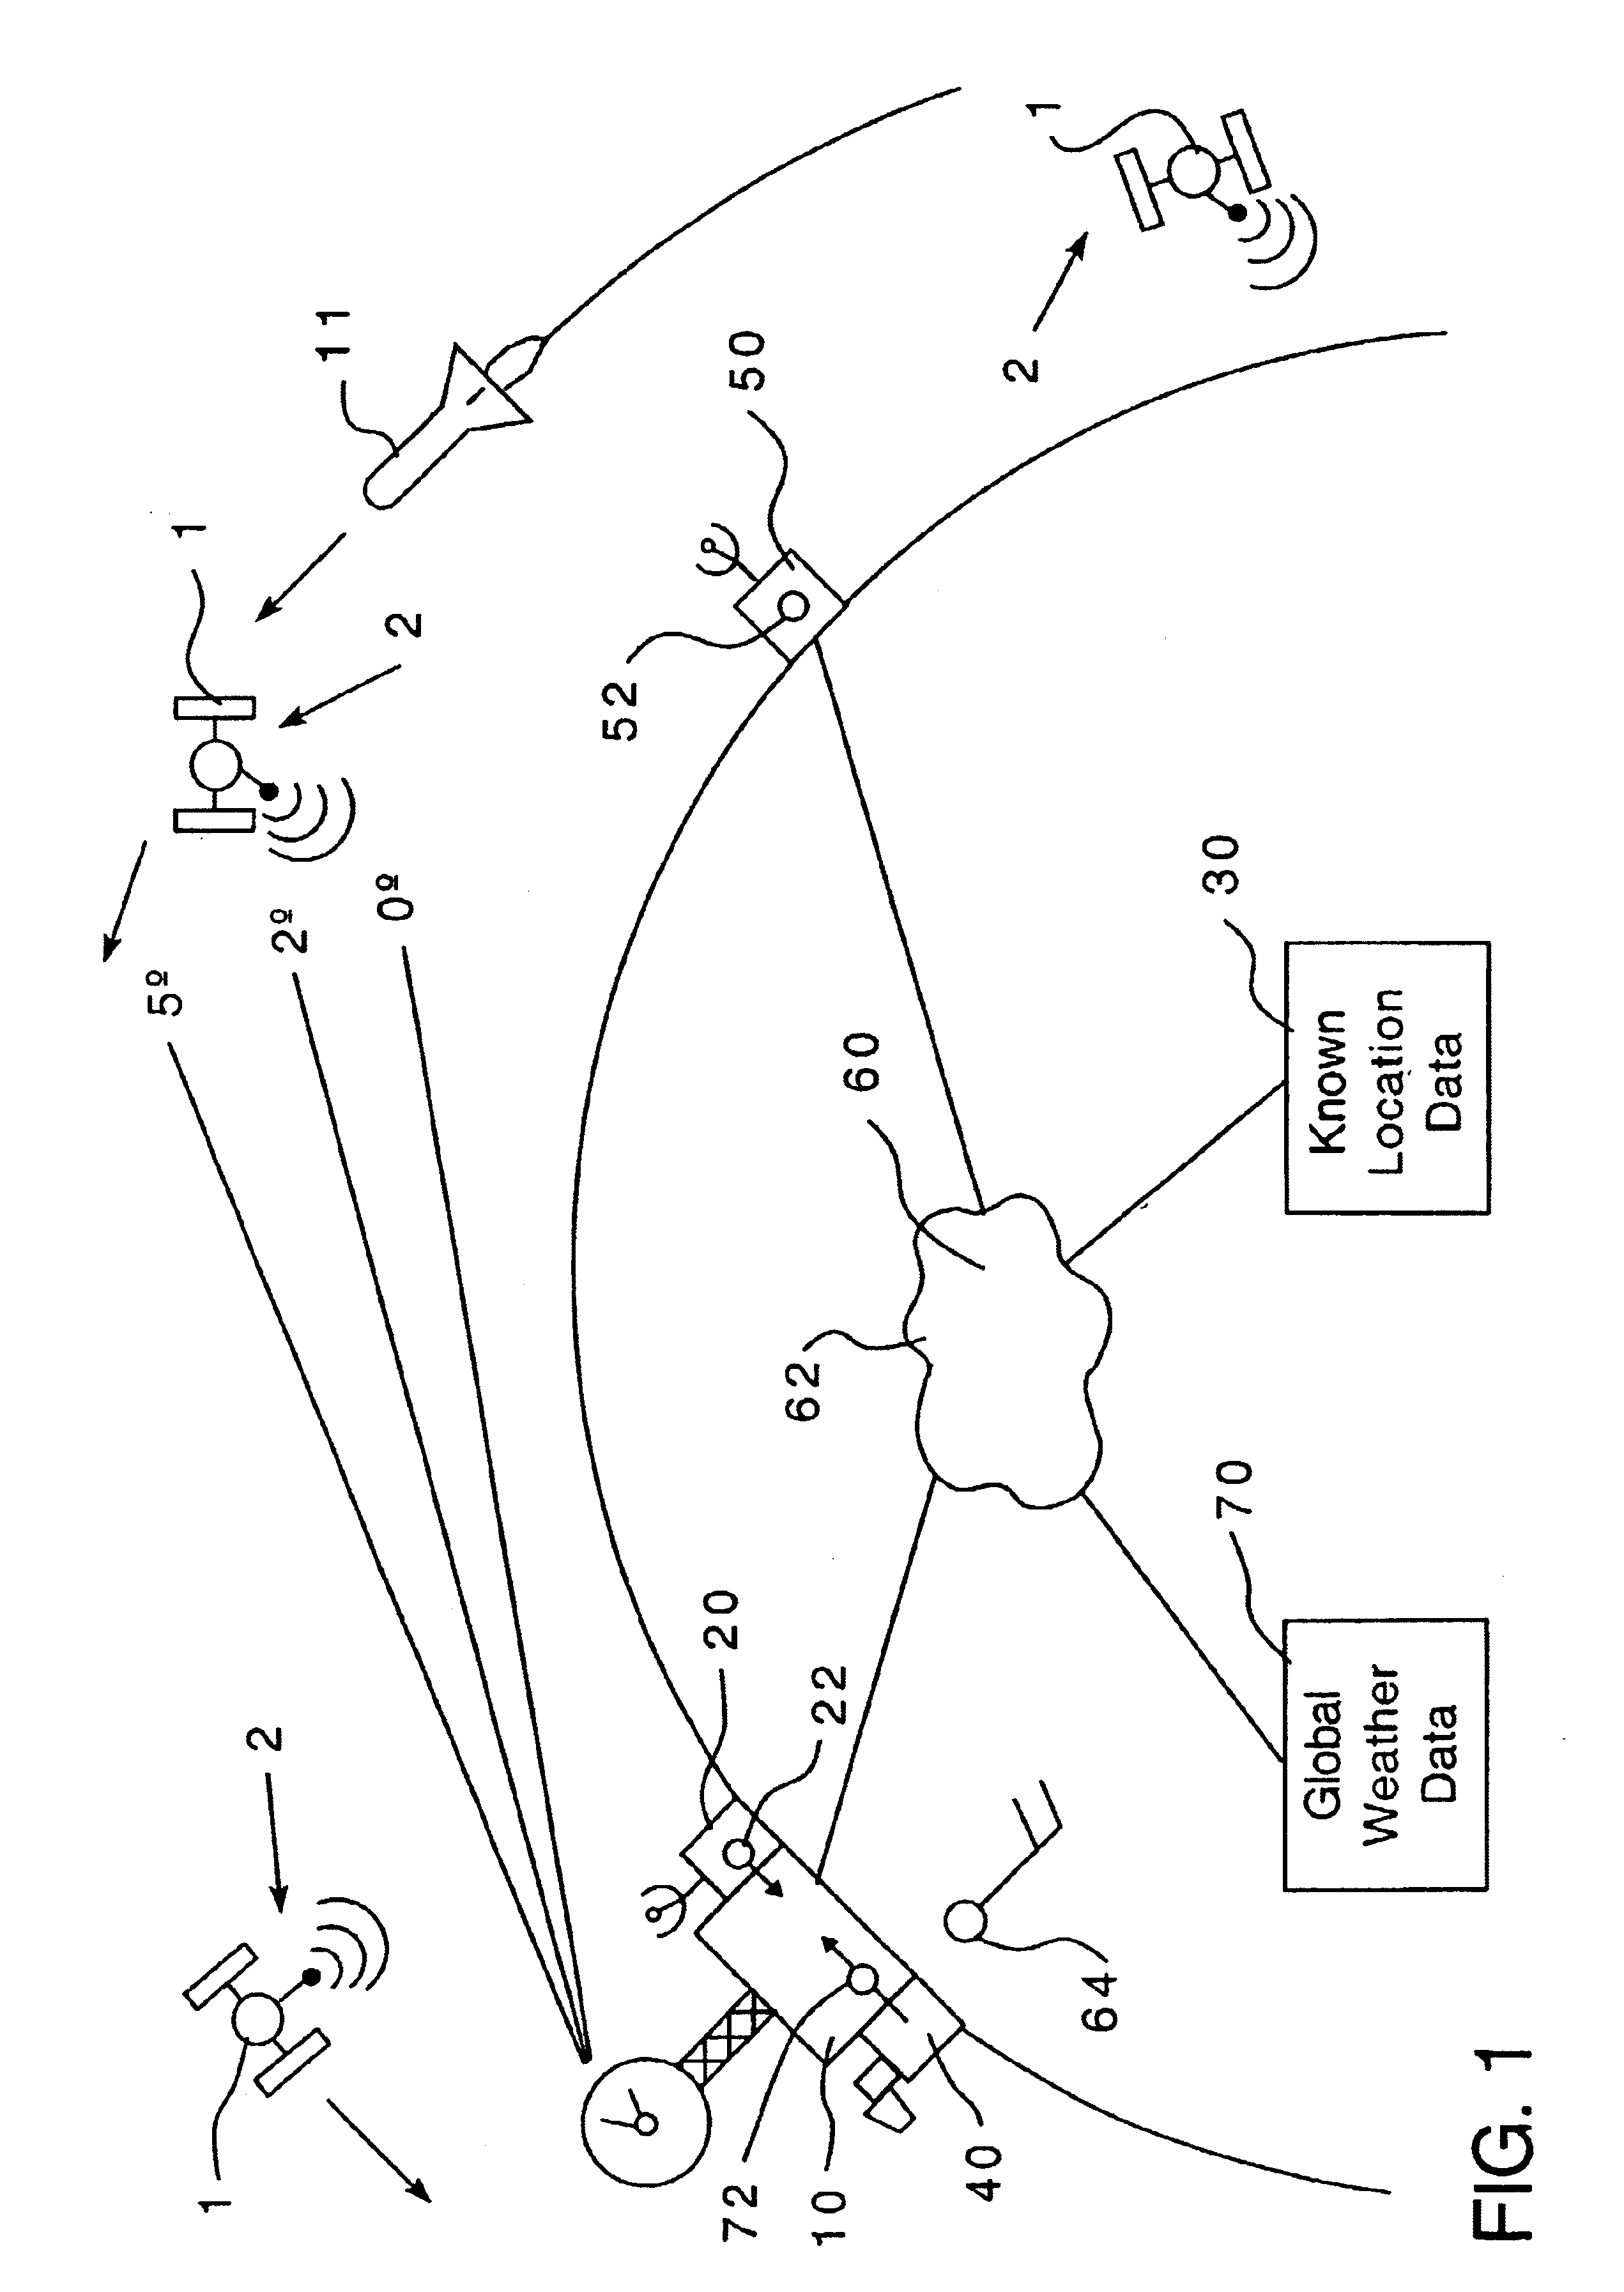 Method of compensating for atmospheric effects while using near horizon radar utilizing a Doppler signal